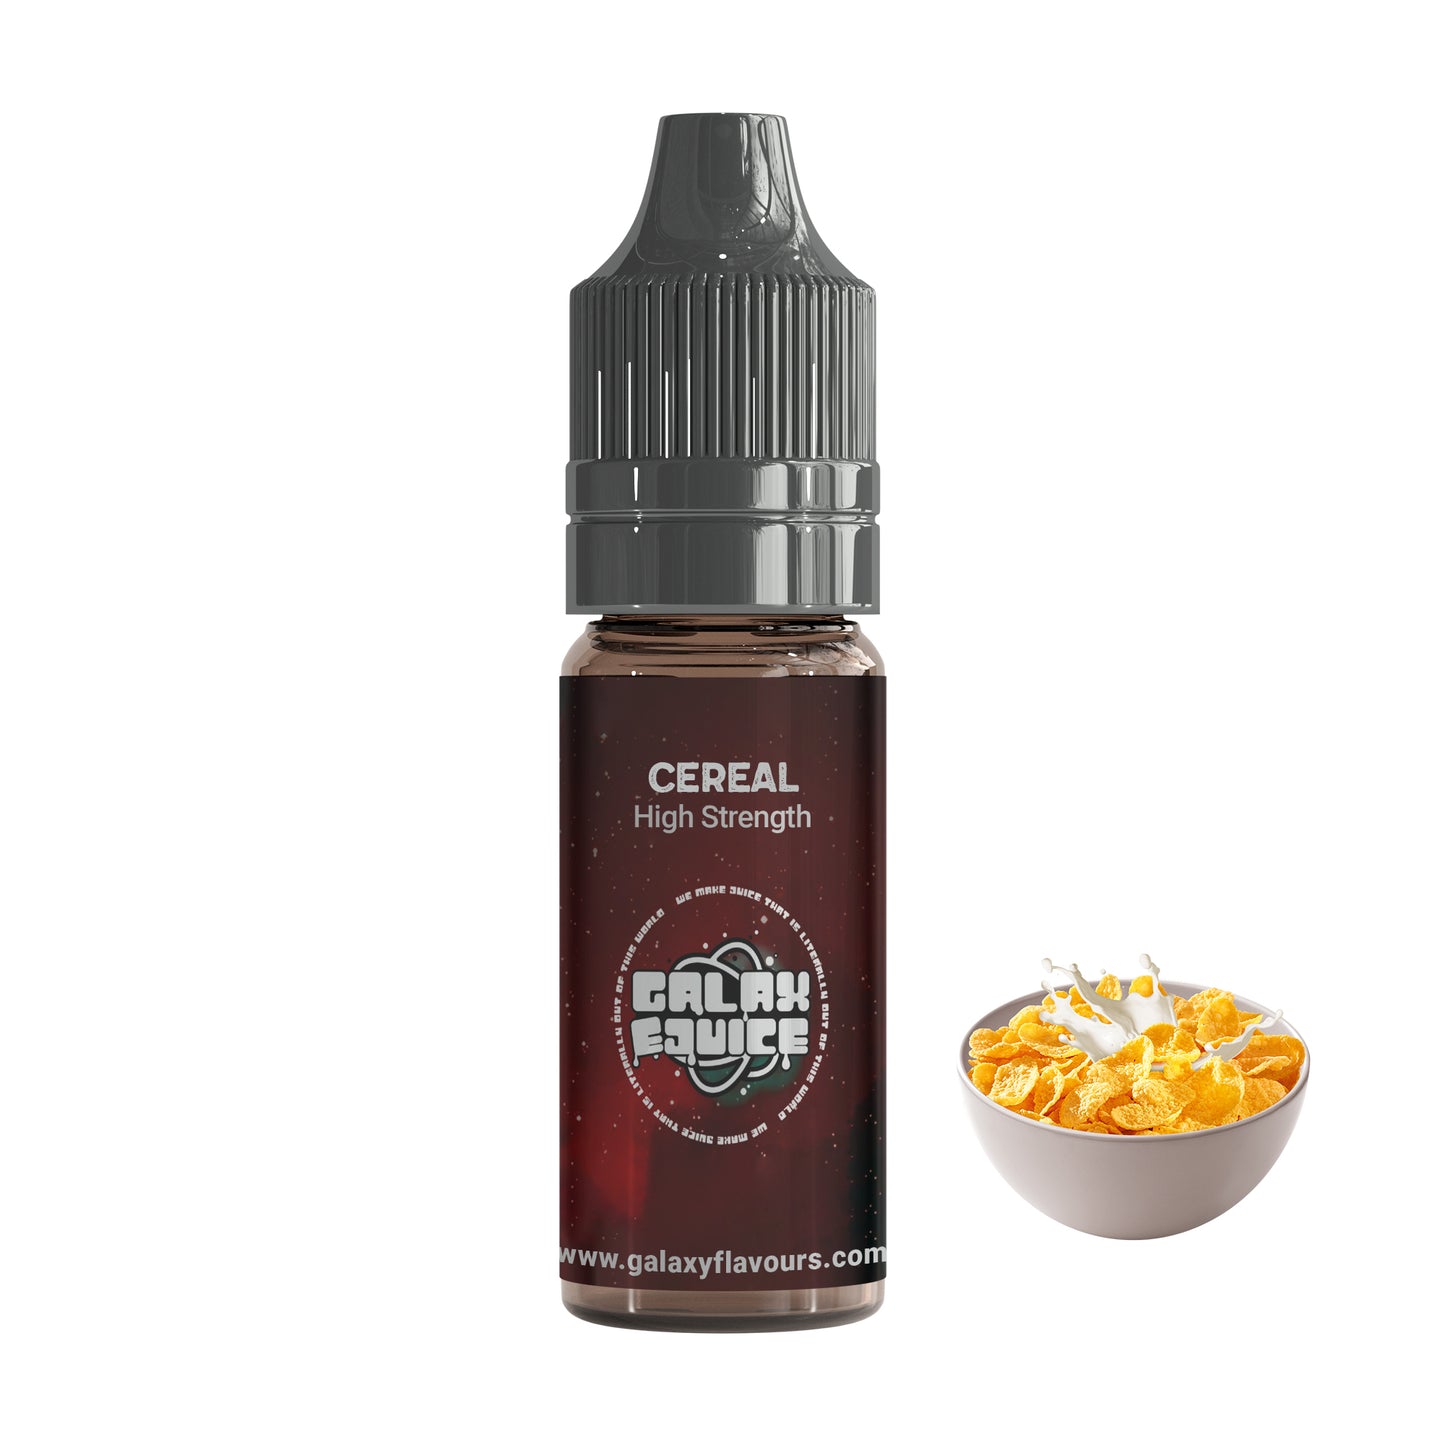 Cereal High Strength Professional Flavouring.